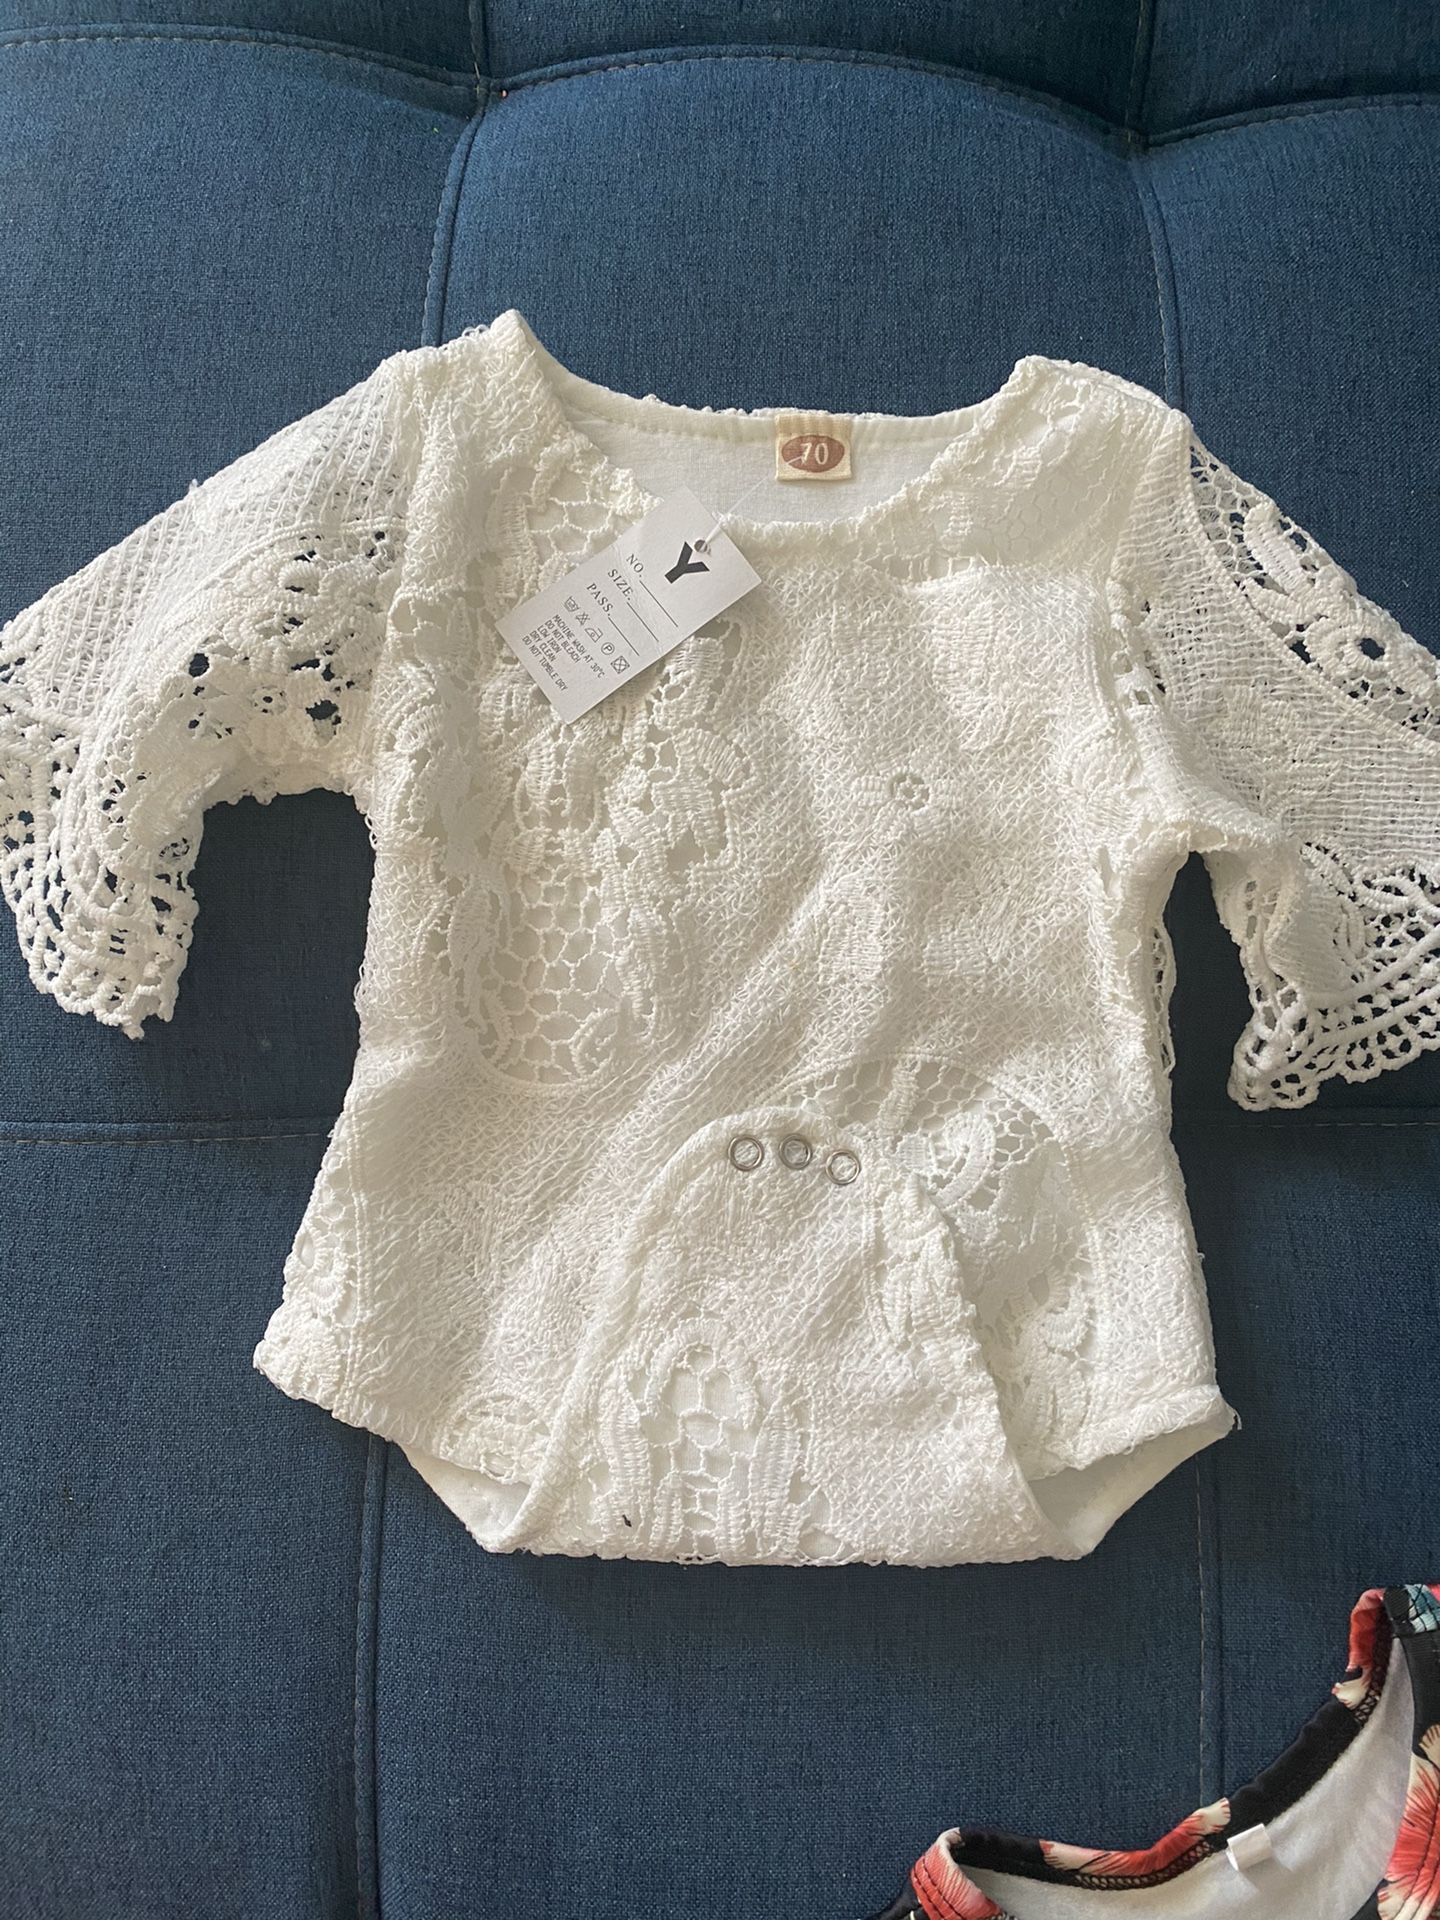 Beautiful quality baby clothes for sale